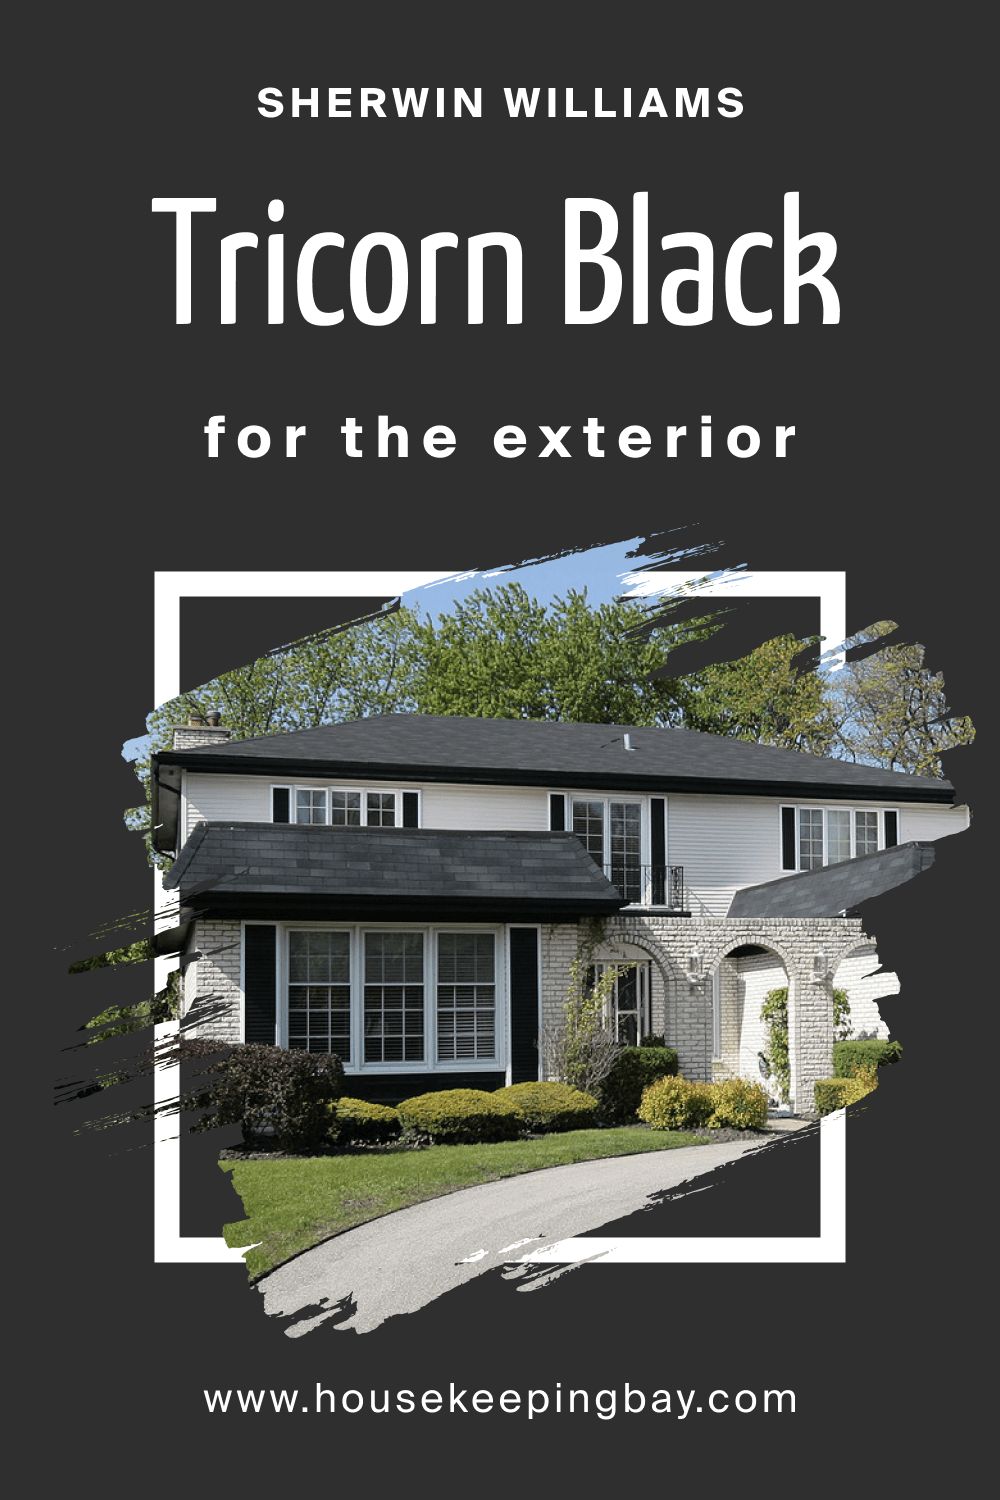 Sherwin Williams.SW 6258 Tricorn Black For the exterior